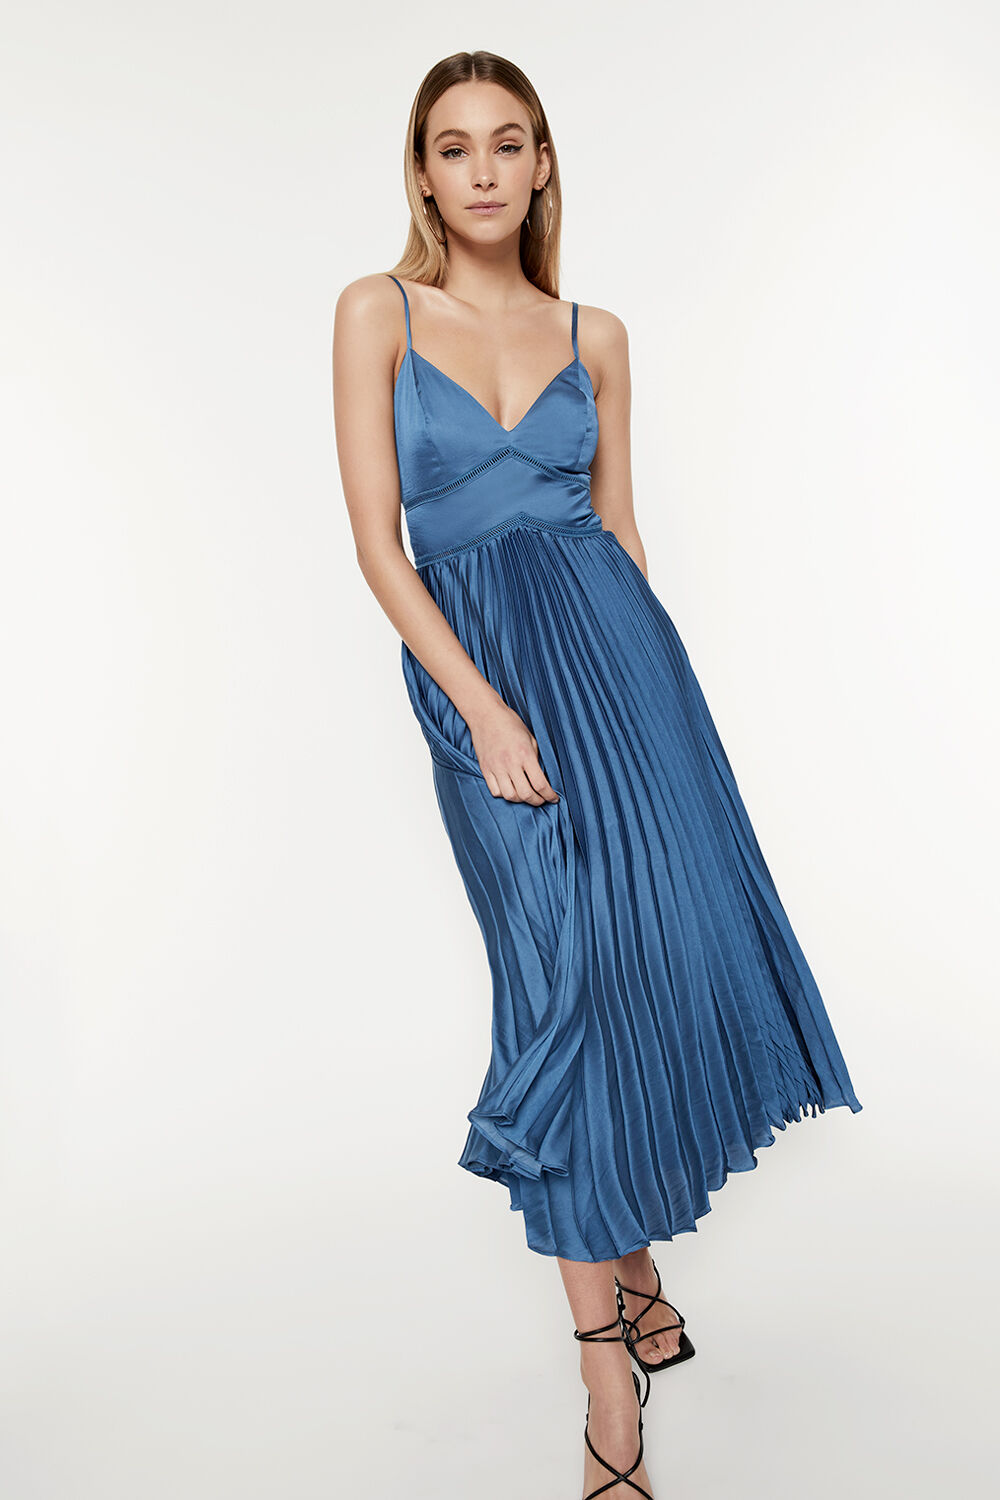 MARY PLEATED DRESS in colour BAYBERRY